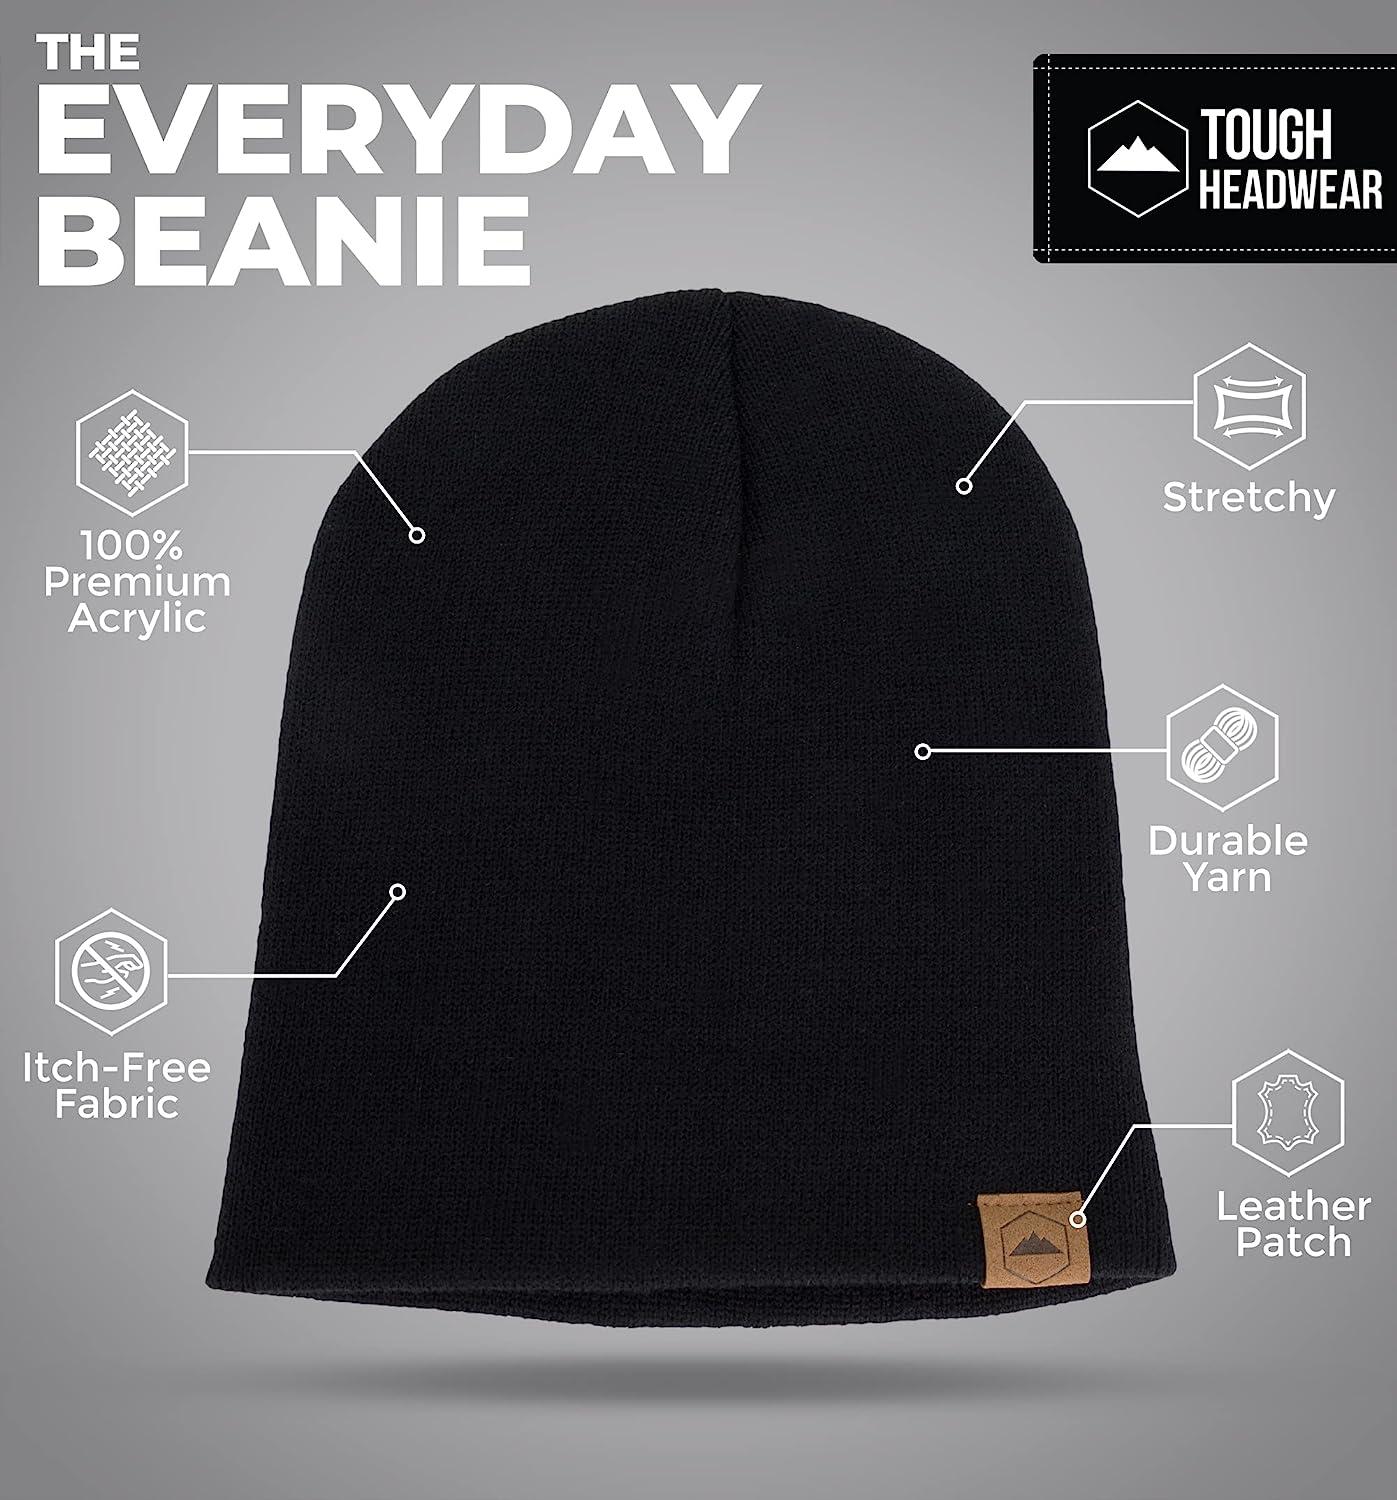 Tough Headwear Knit Cap Women Winter Warm Hat Hat, and for Cap Ribbed One for Beanie Men - Weather Cold Skate Toboggan - Size Stocking Black